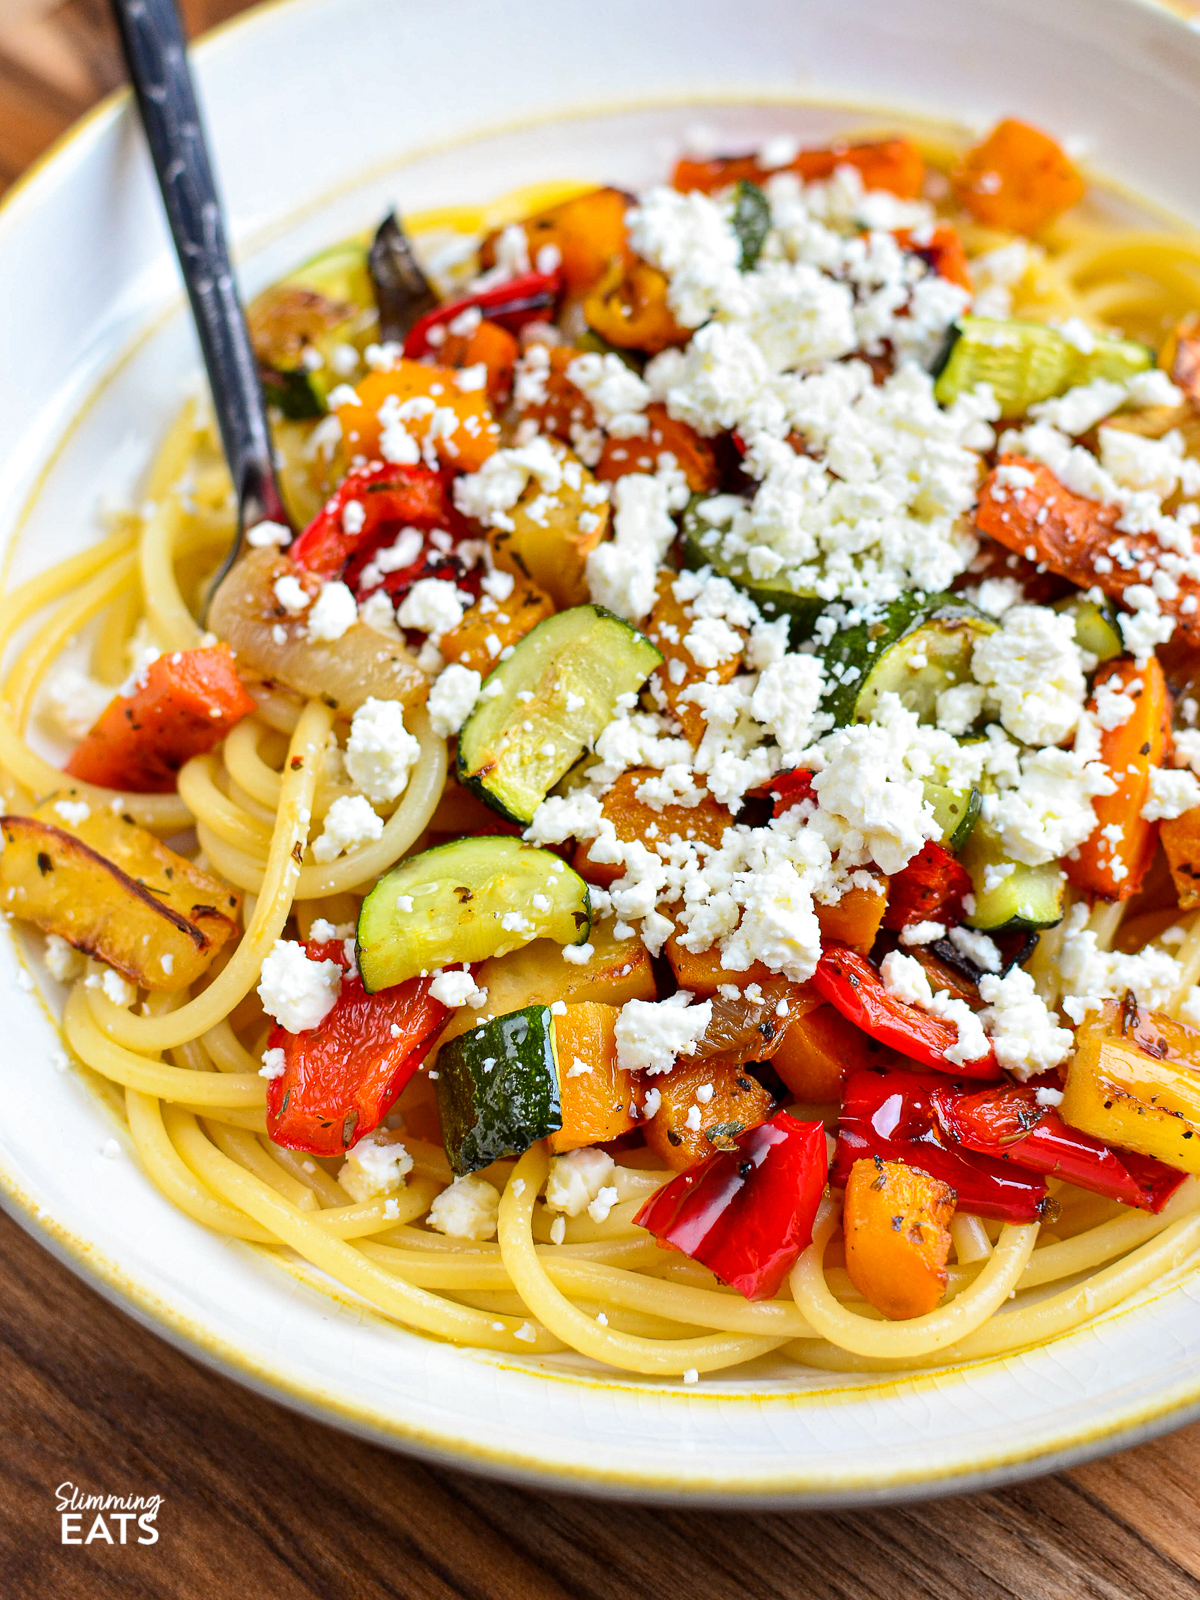 Roasted Vegetables with Feta and Pasta